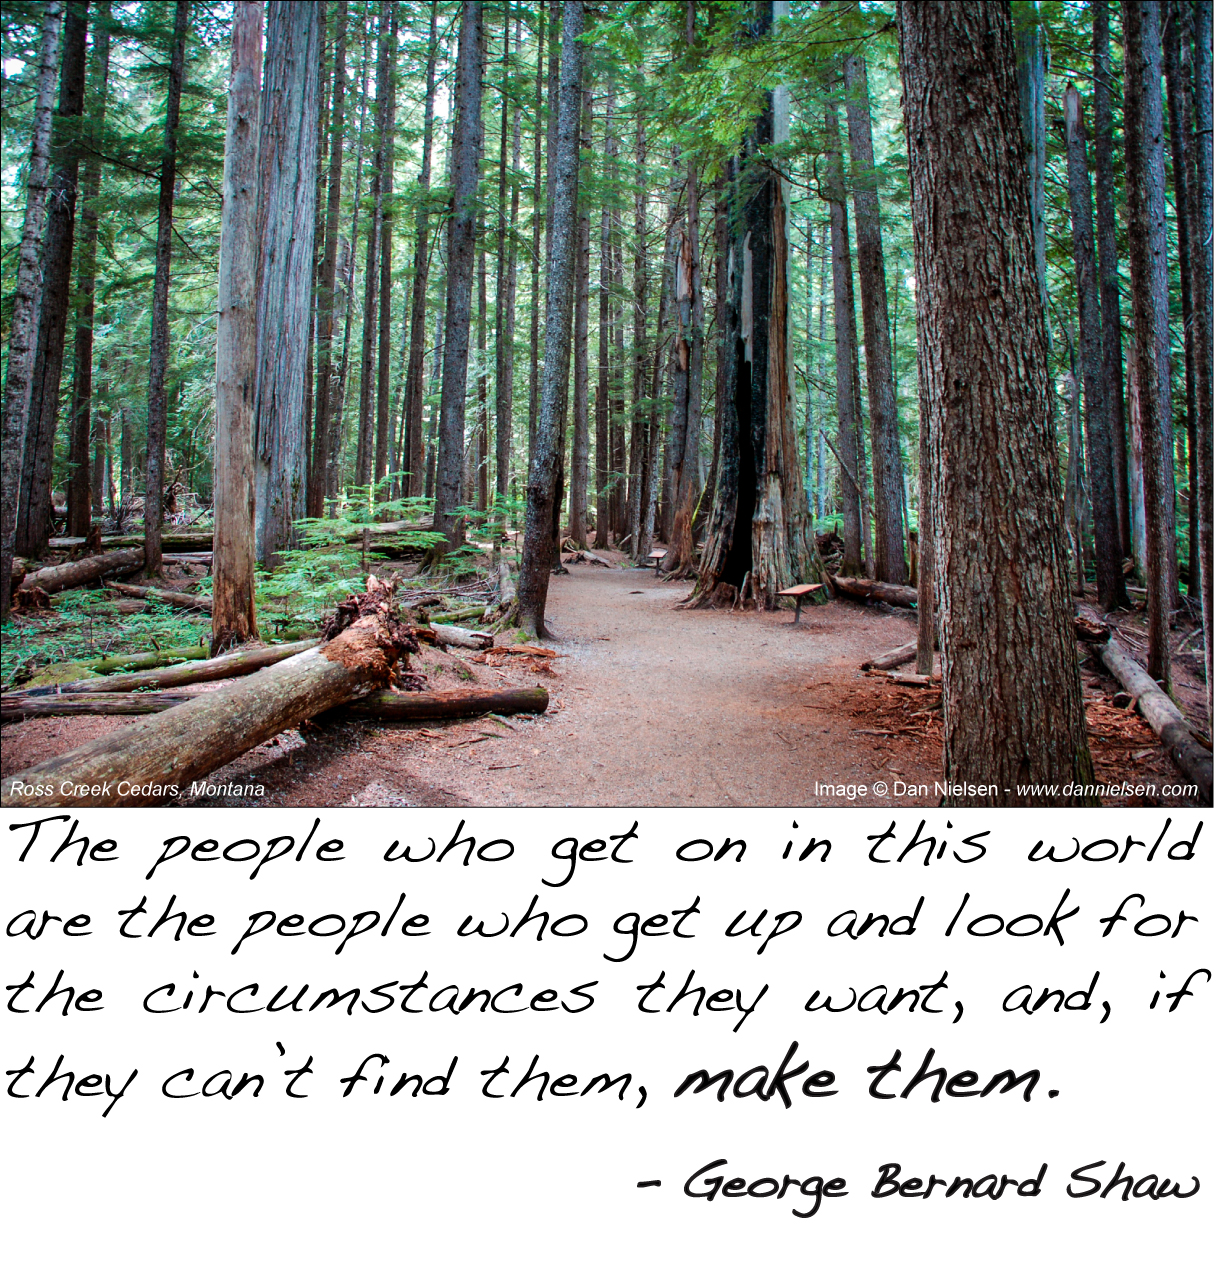 “The people who get on in this world are the people who get up and look for the circumstances they want, and, if they can’t find them, make them.” George Bernard Shaw